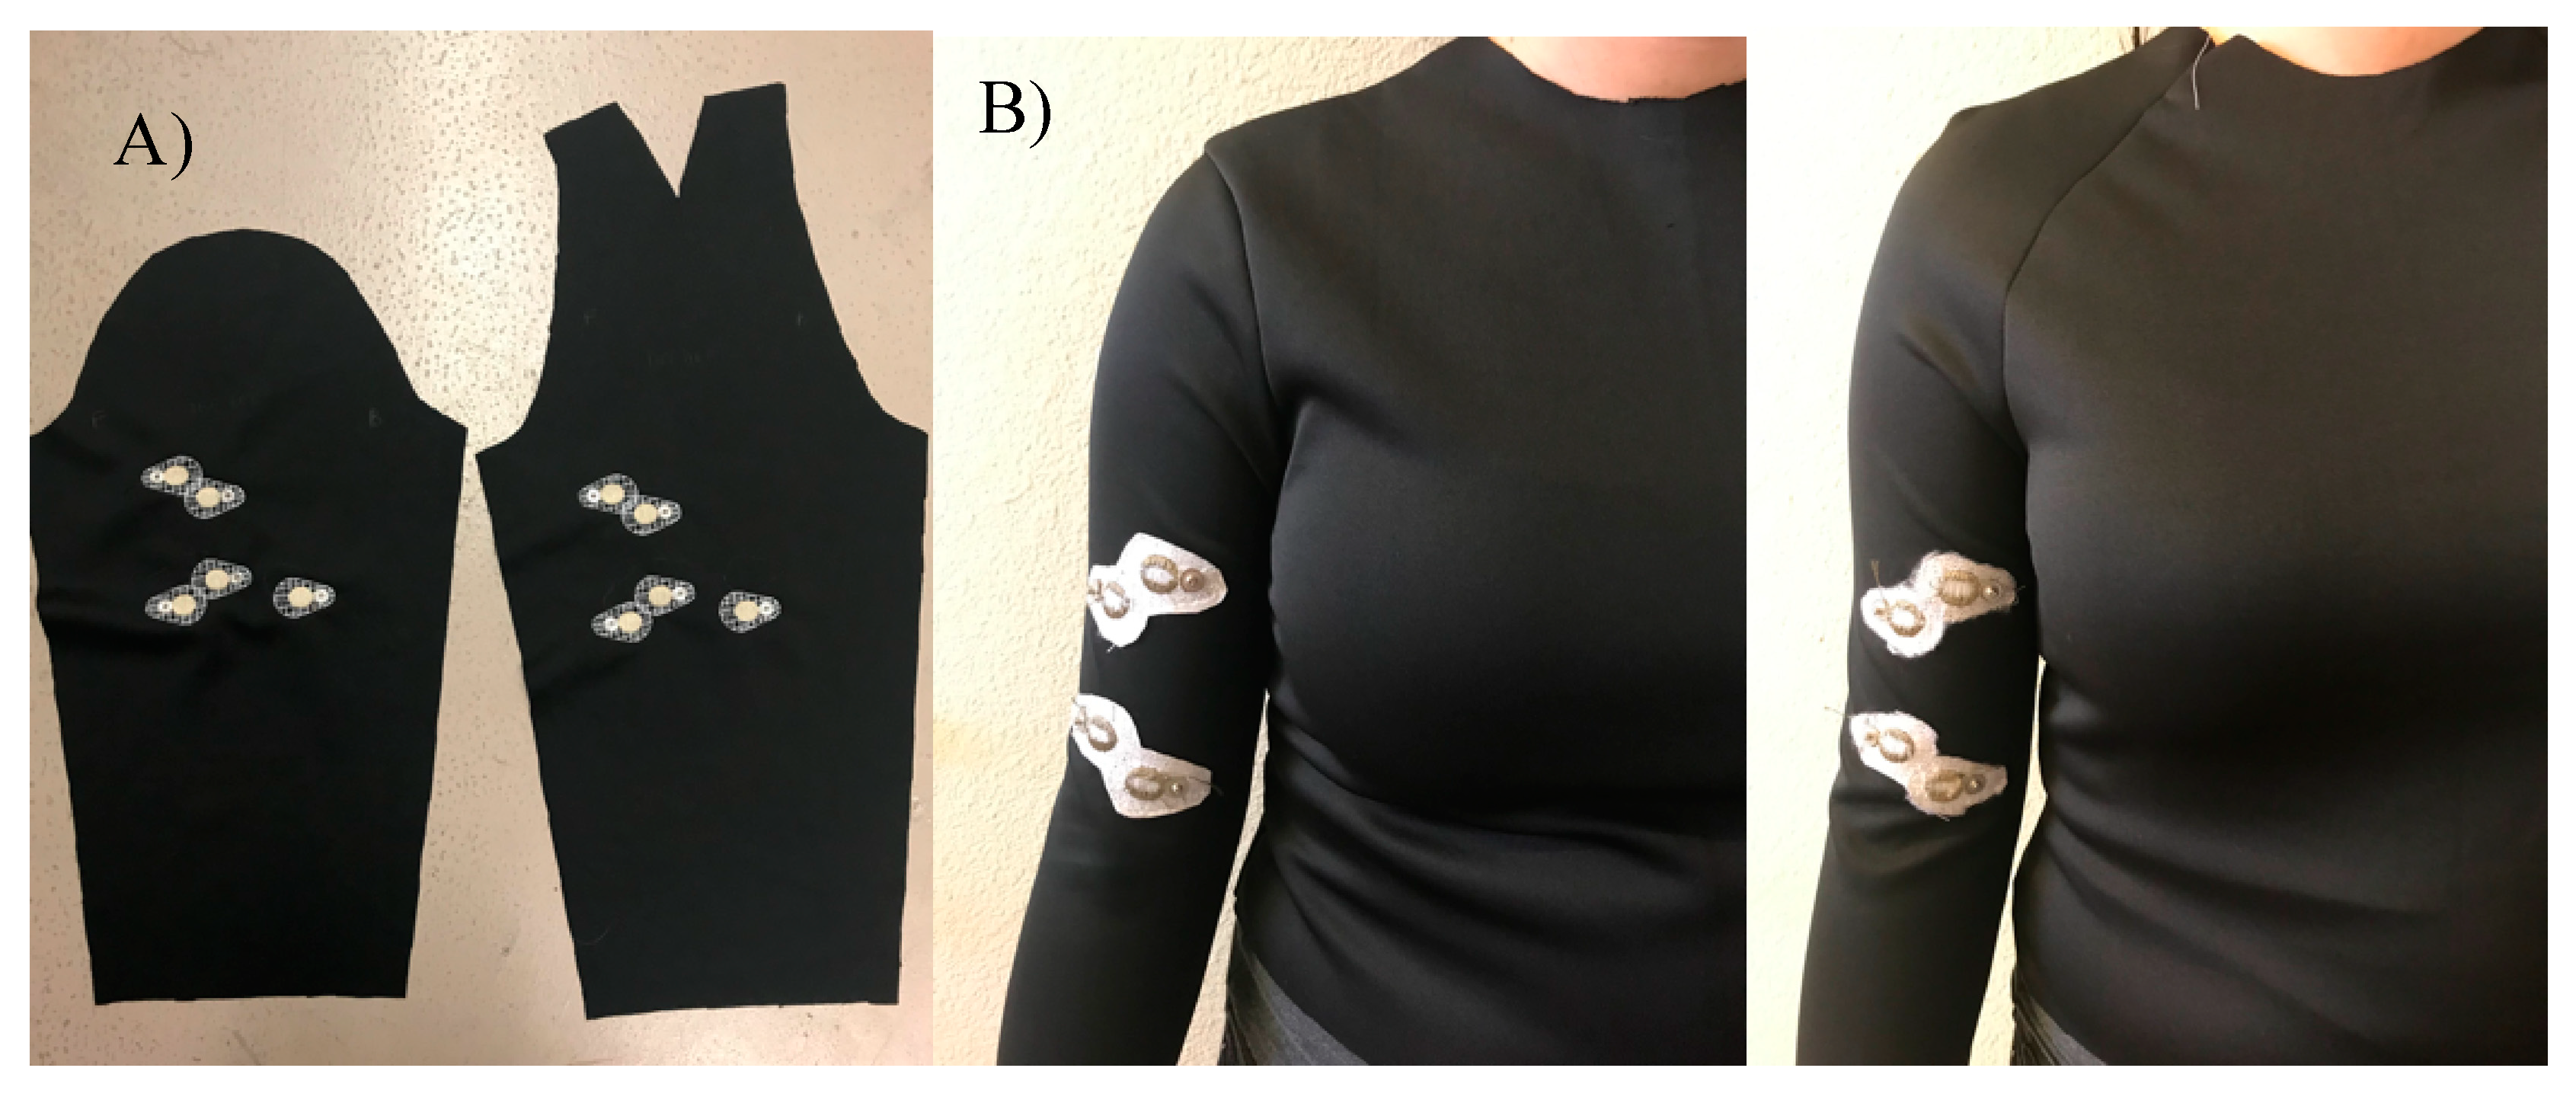 Compression suits with and without films and their effects on EMG during  isokinetic exercise, Fashion and Textiles